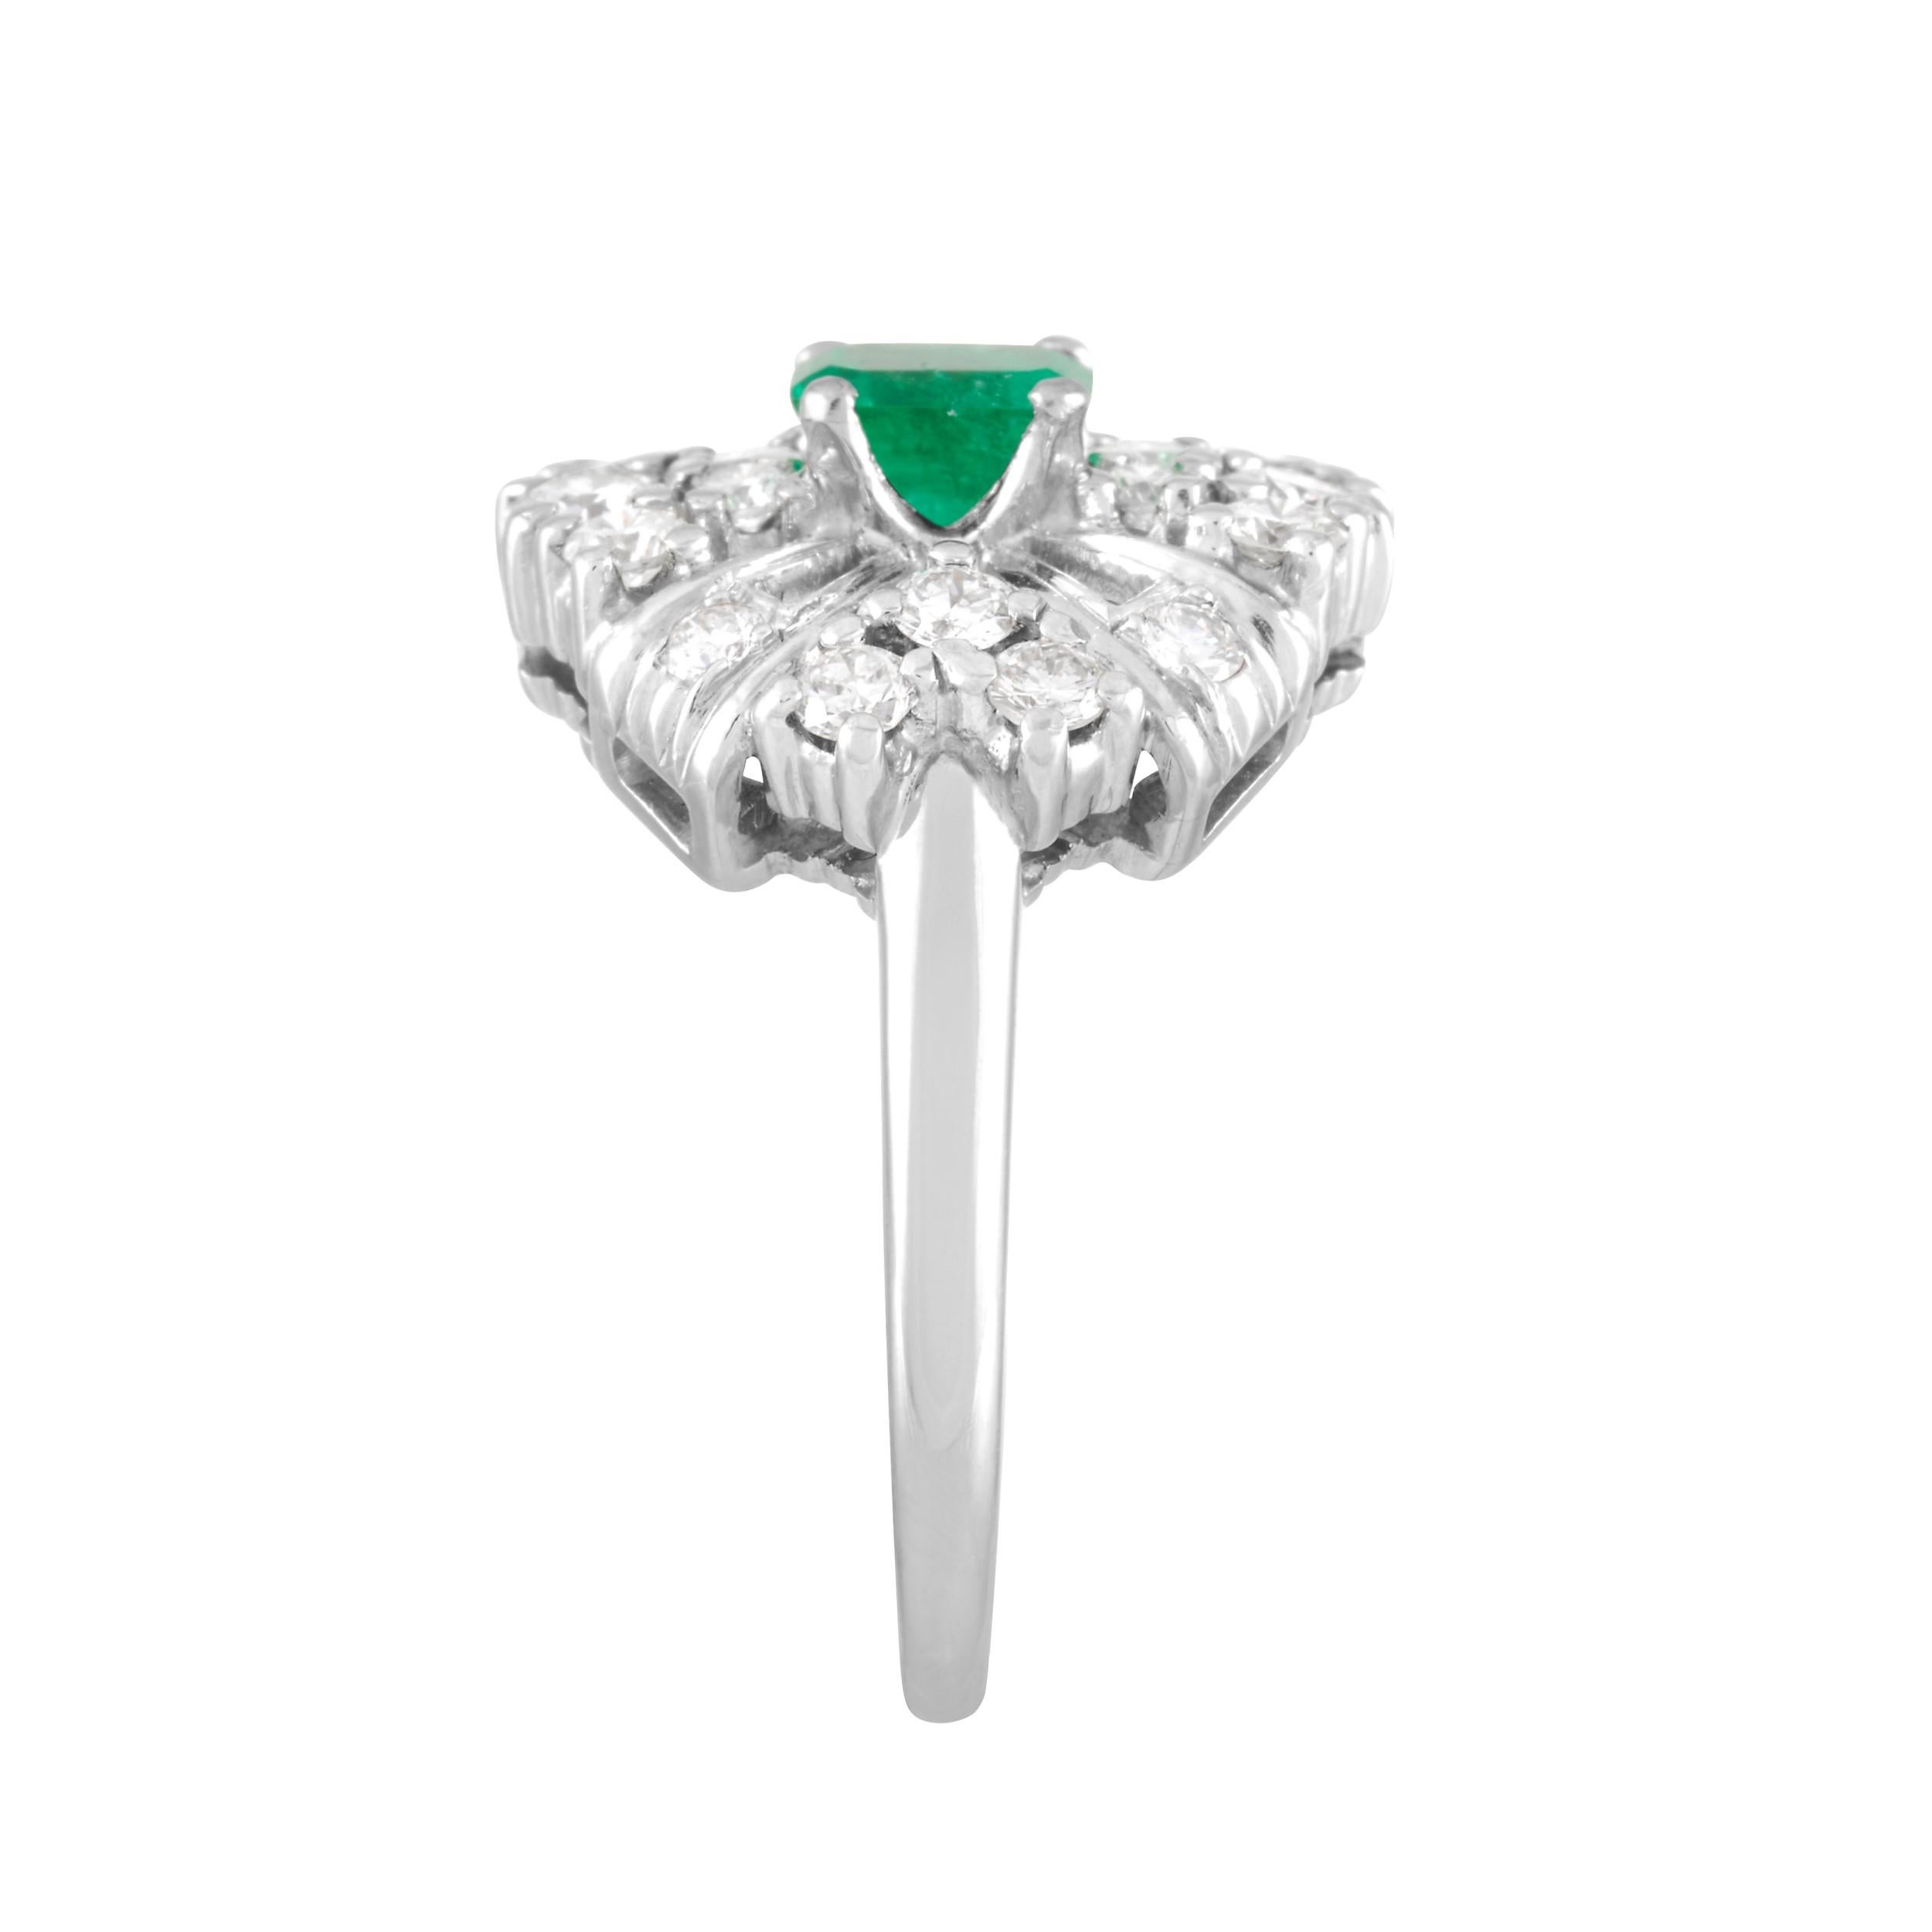 Women's Bailey Banks & Biddle 0.50 Carat Emerald and Diamond Ring in Platinum